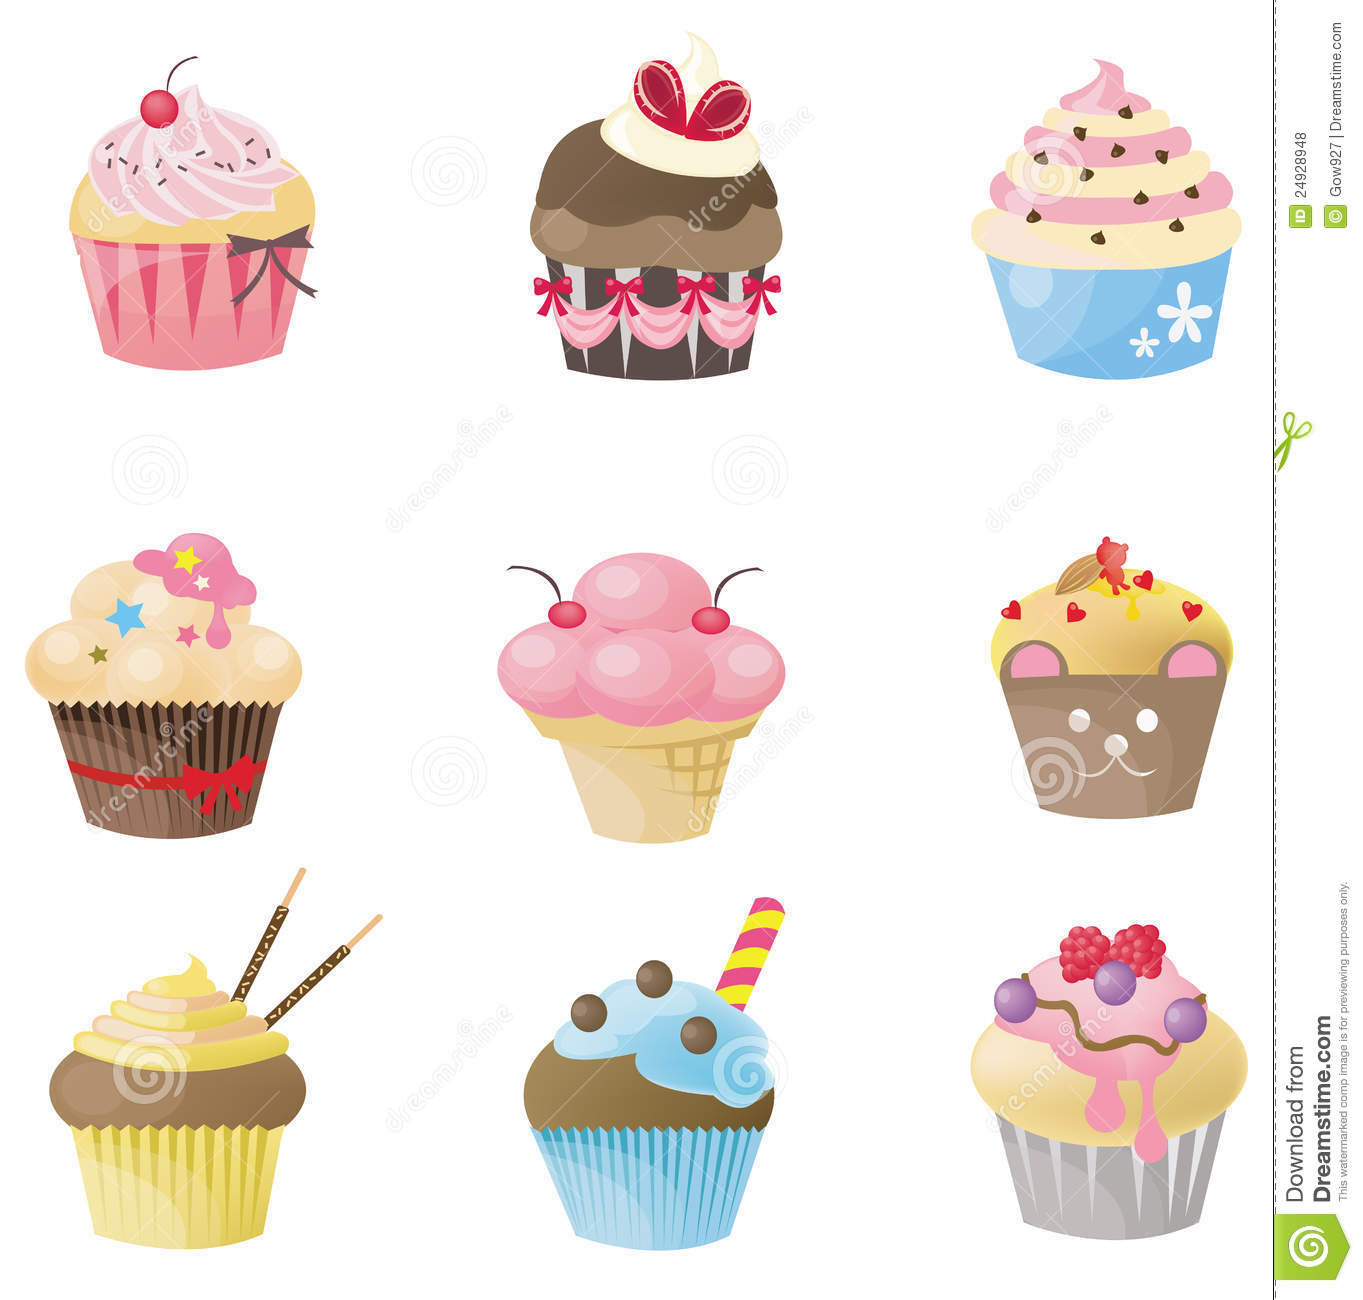 Cute Cupcake With 9 Different Look Royalty Free Stock Photos   Image